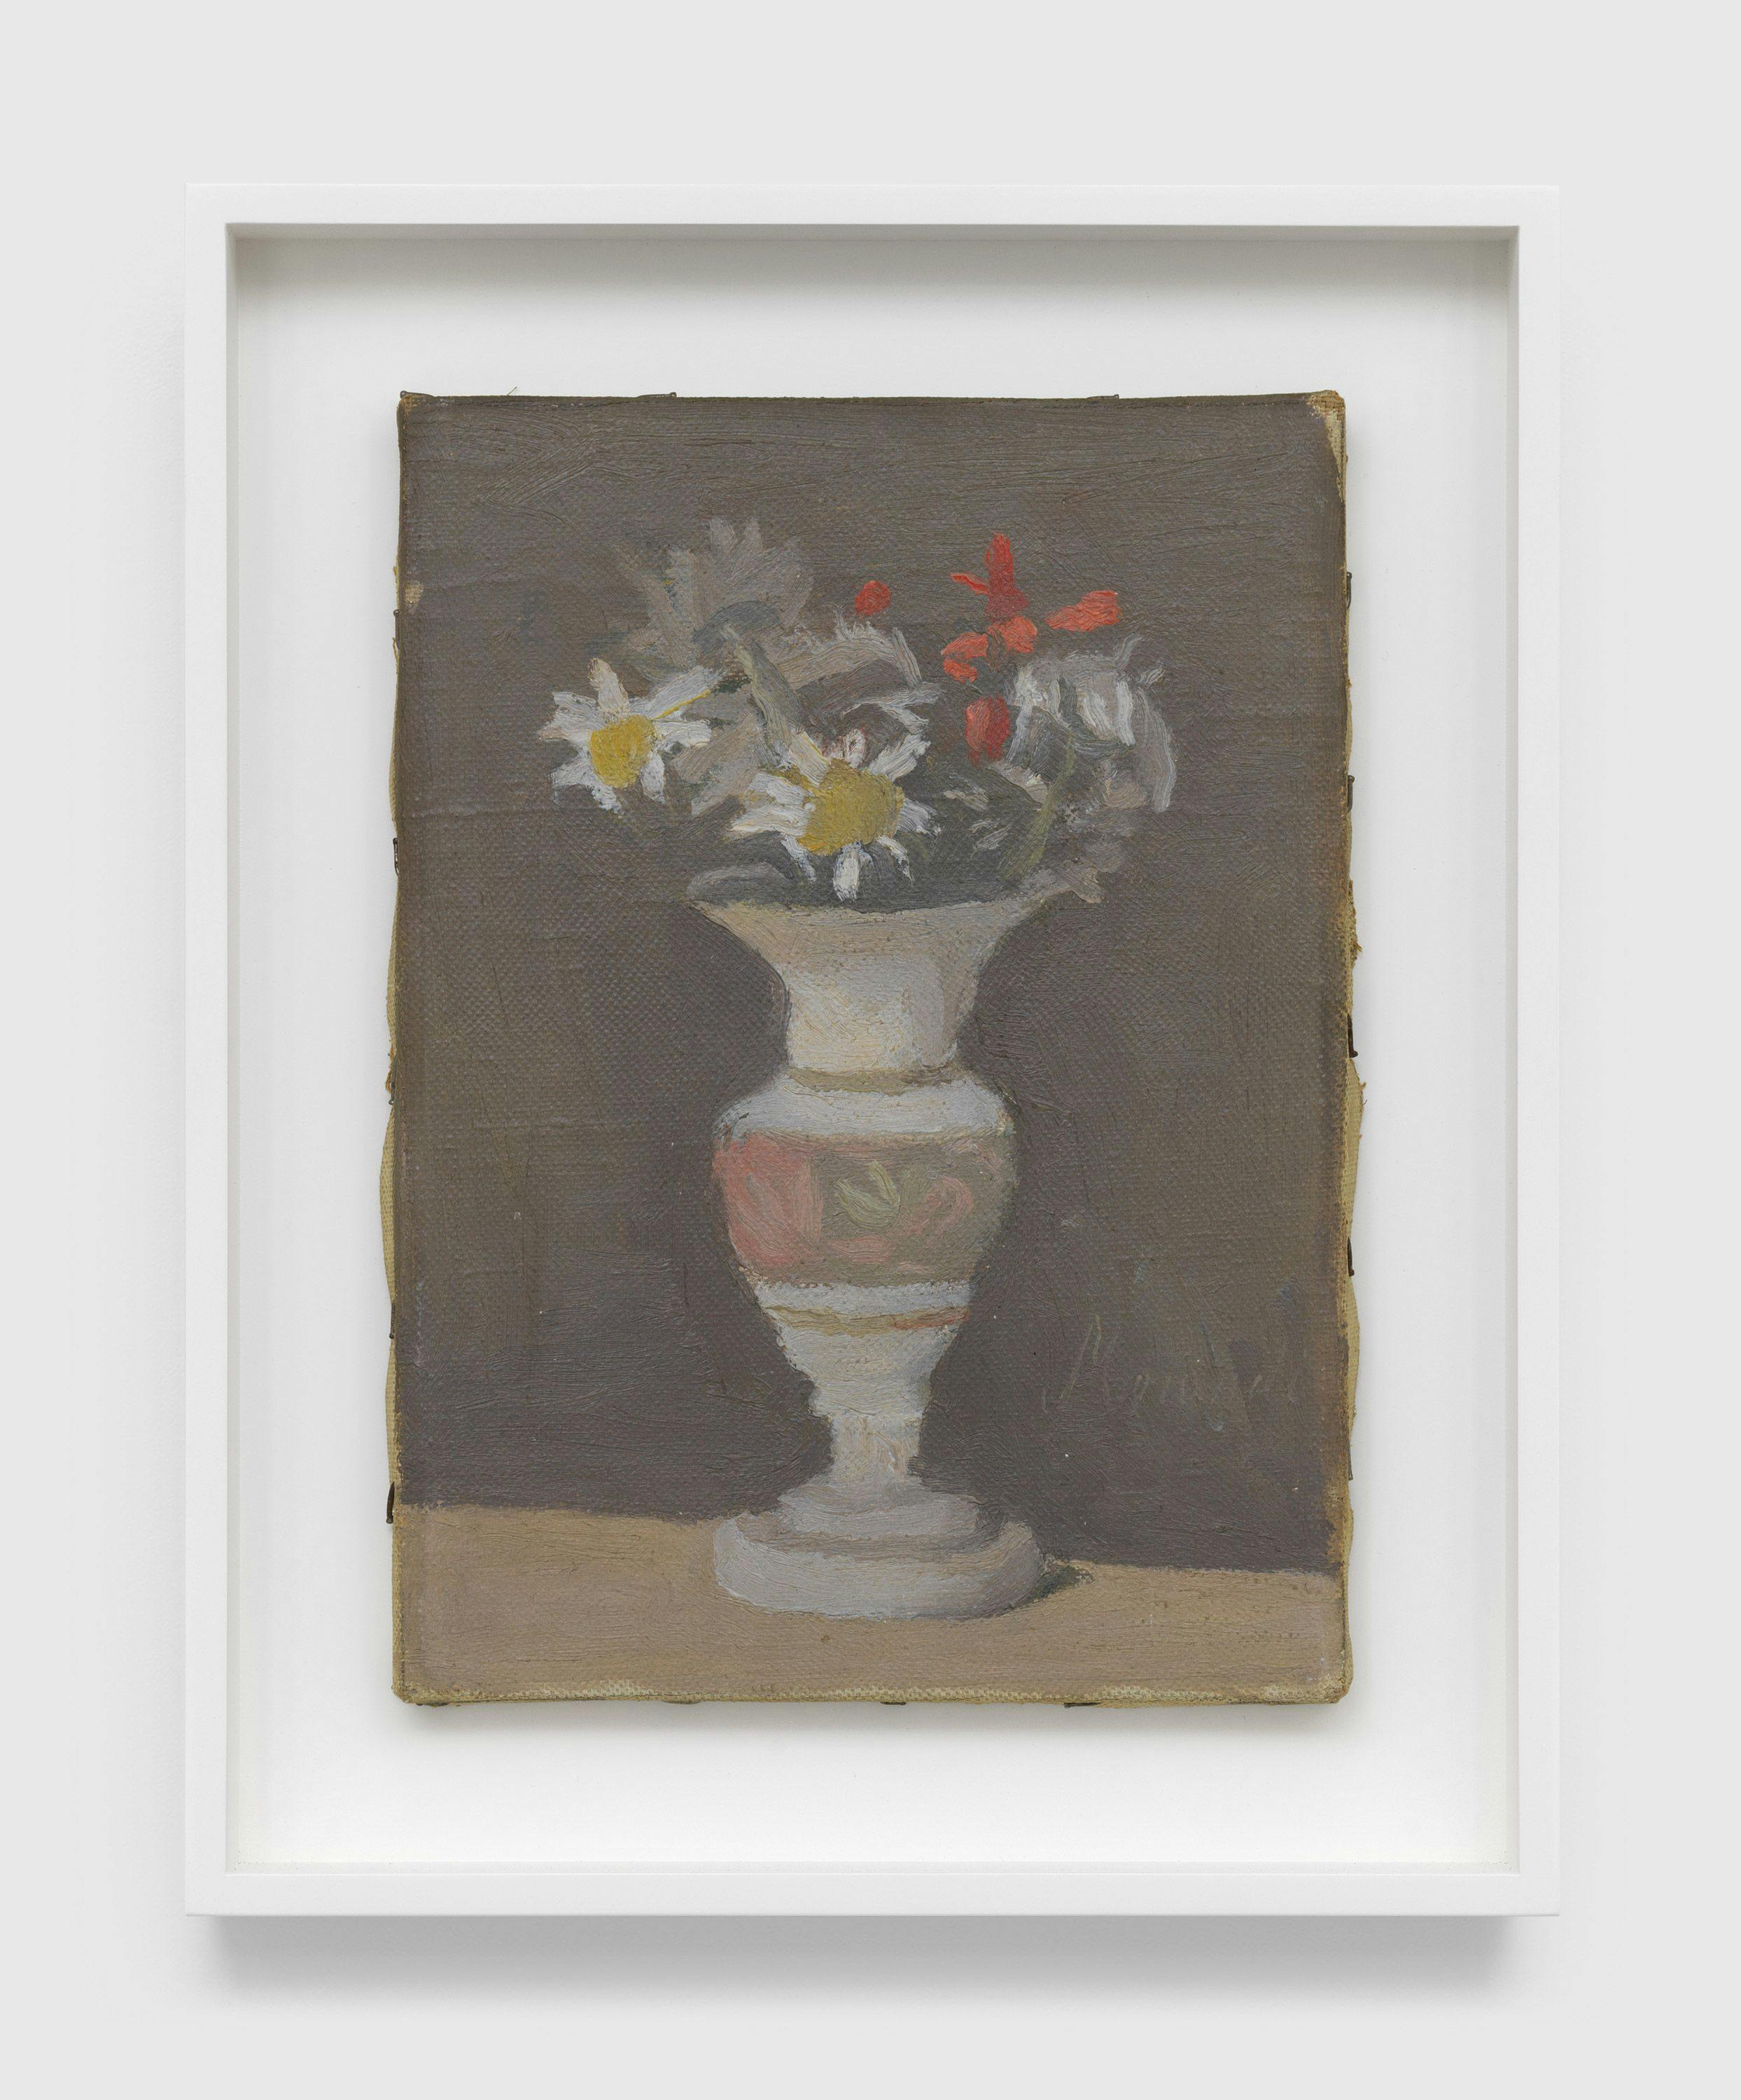 A painting by Giorgio Morandi, titled Fiori (Flowers), dated 1947.